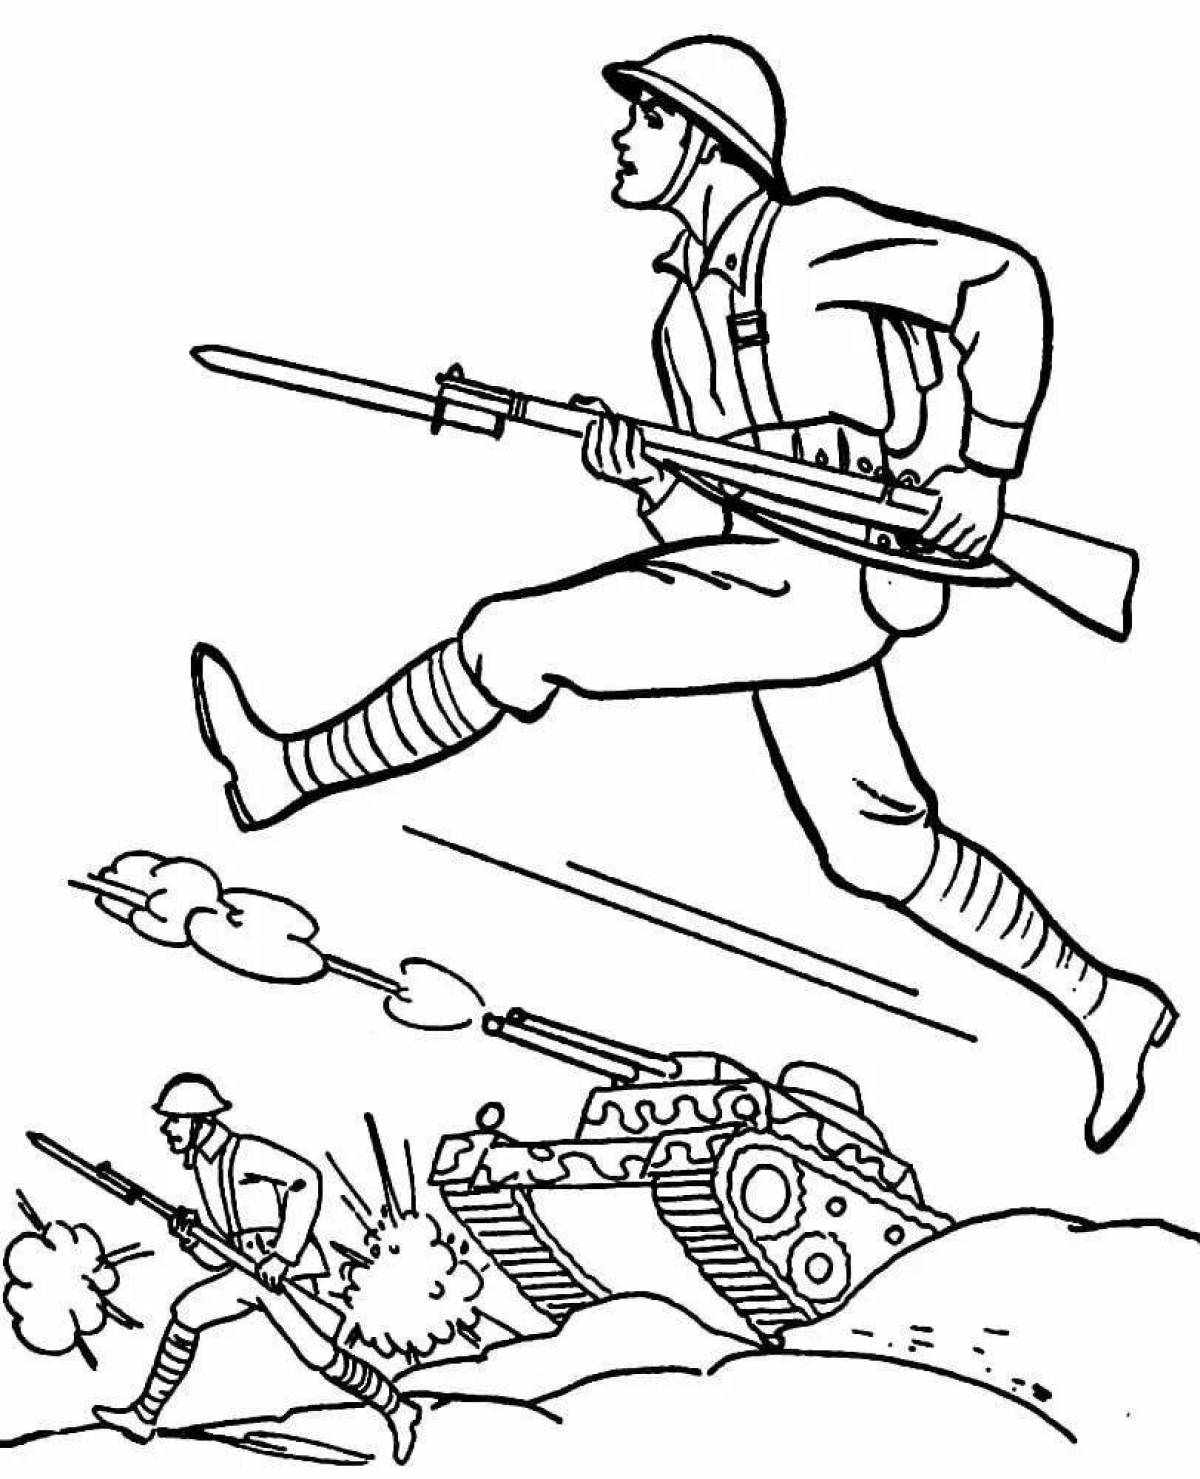 Colourful military coloring for children